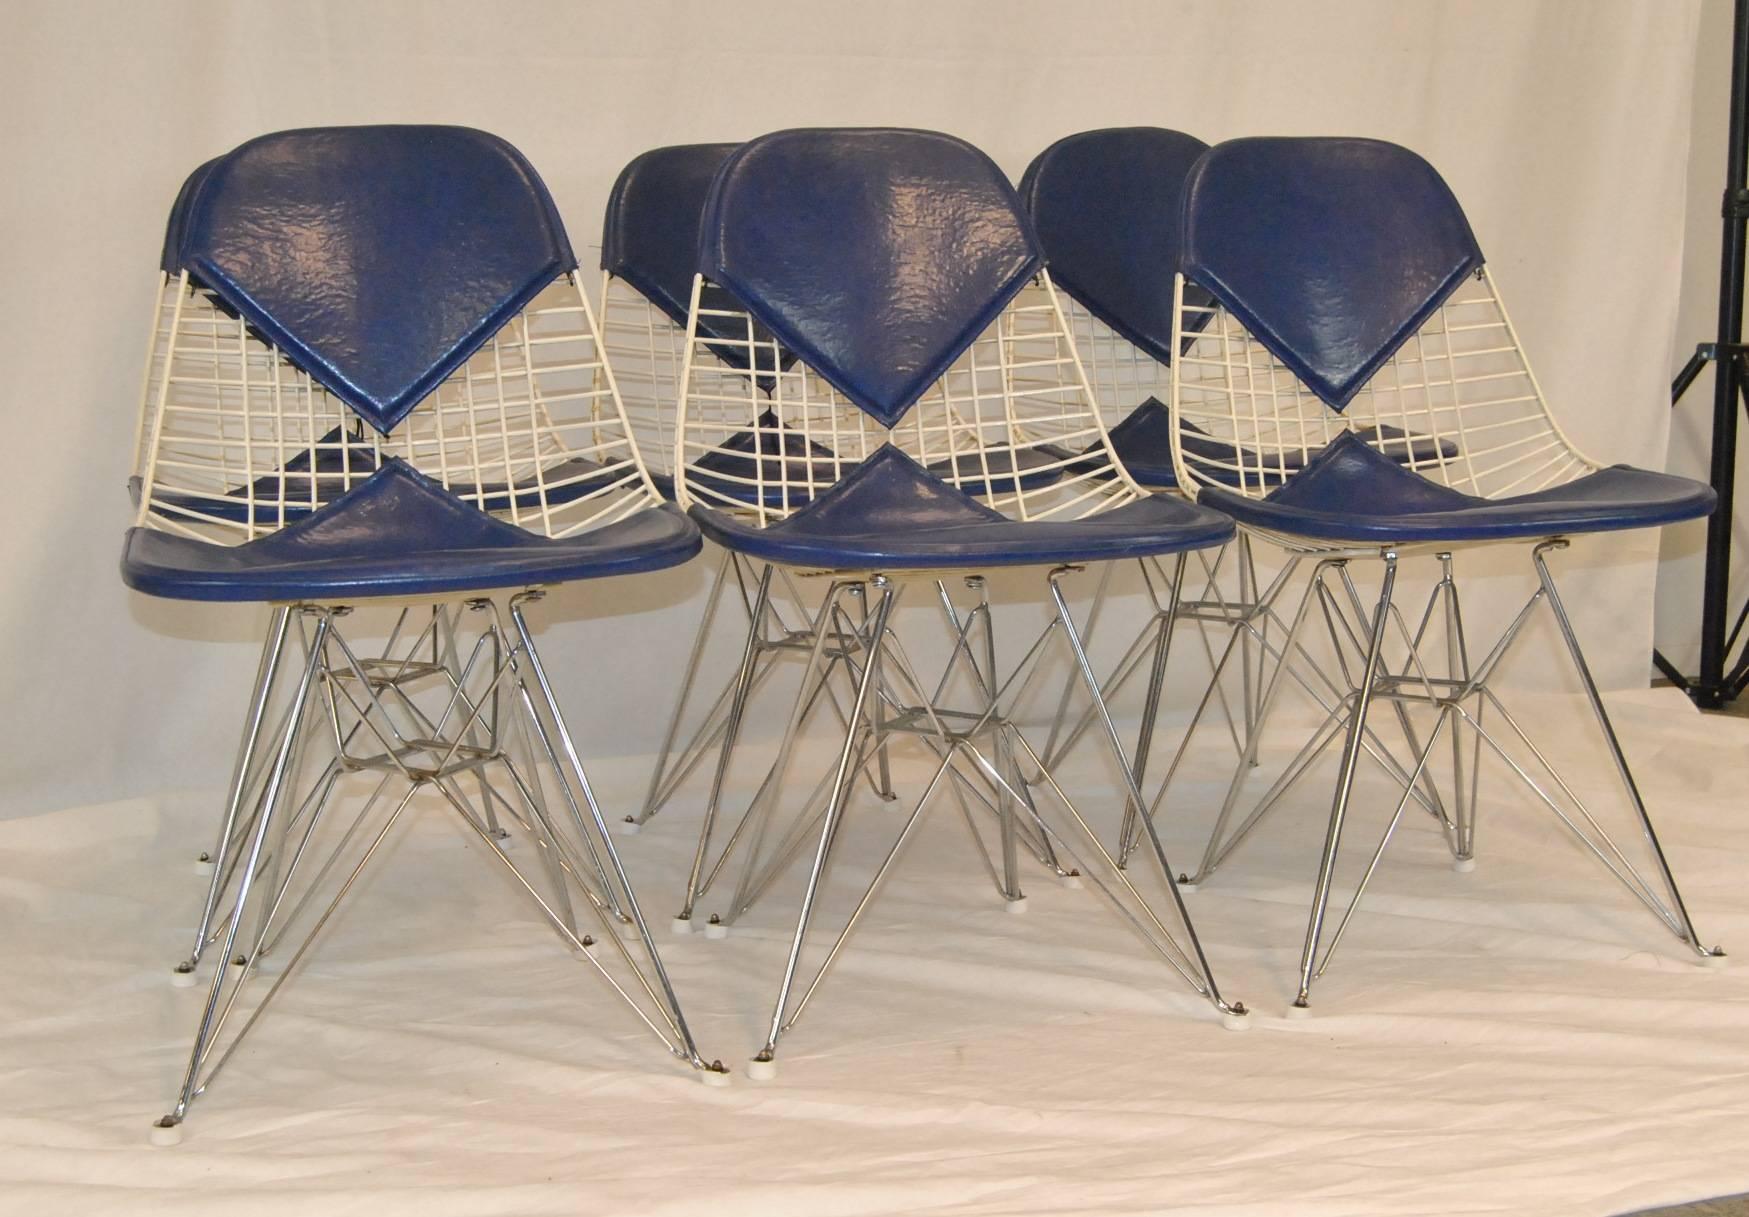 A great set of six (6) wire chairs designed by Charles Eames and produced by Herman Miller. The frame of the seats are powder coated wire with chrome legs. Chairs retain their original dark blue 'bikini' seat cover with Herman Miller tag. Overall